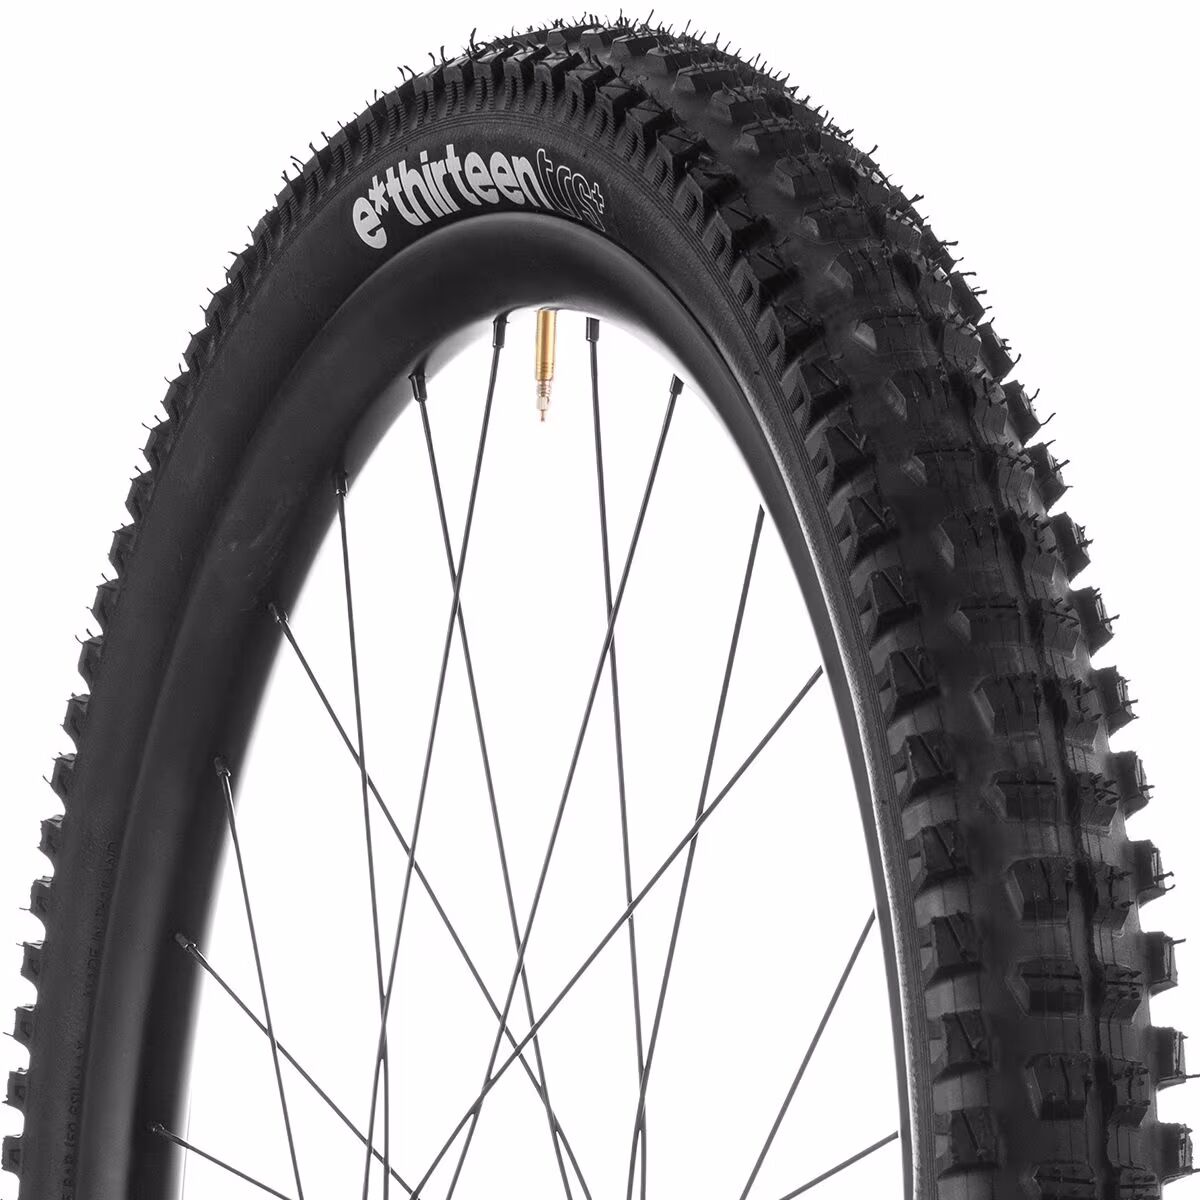 e*thirteen components TRS Plus All-Terrain Gen 3 29in Tire - No Packaging